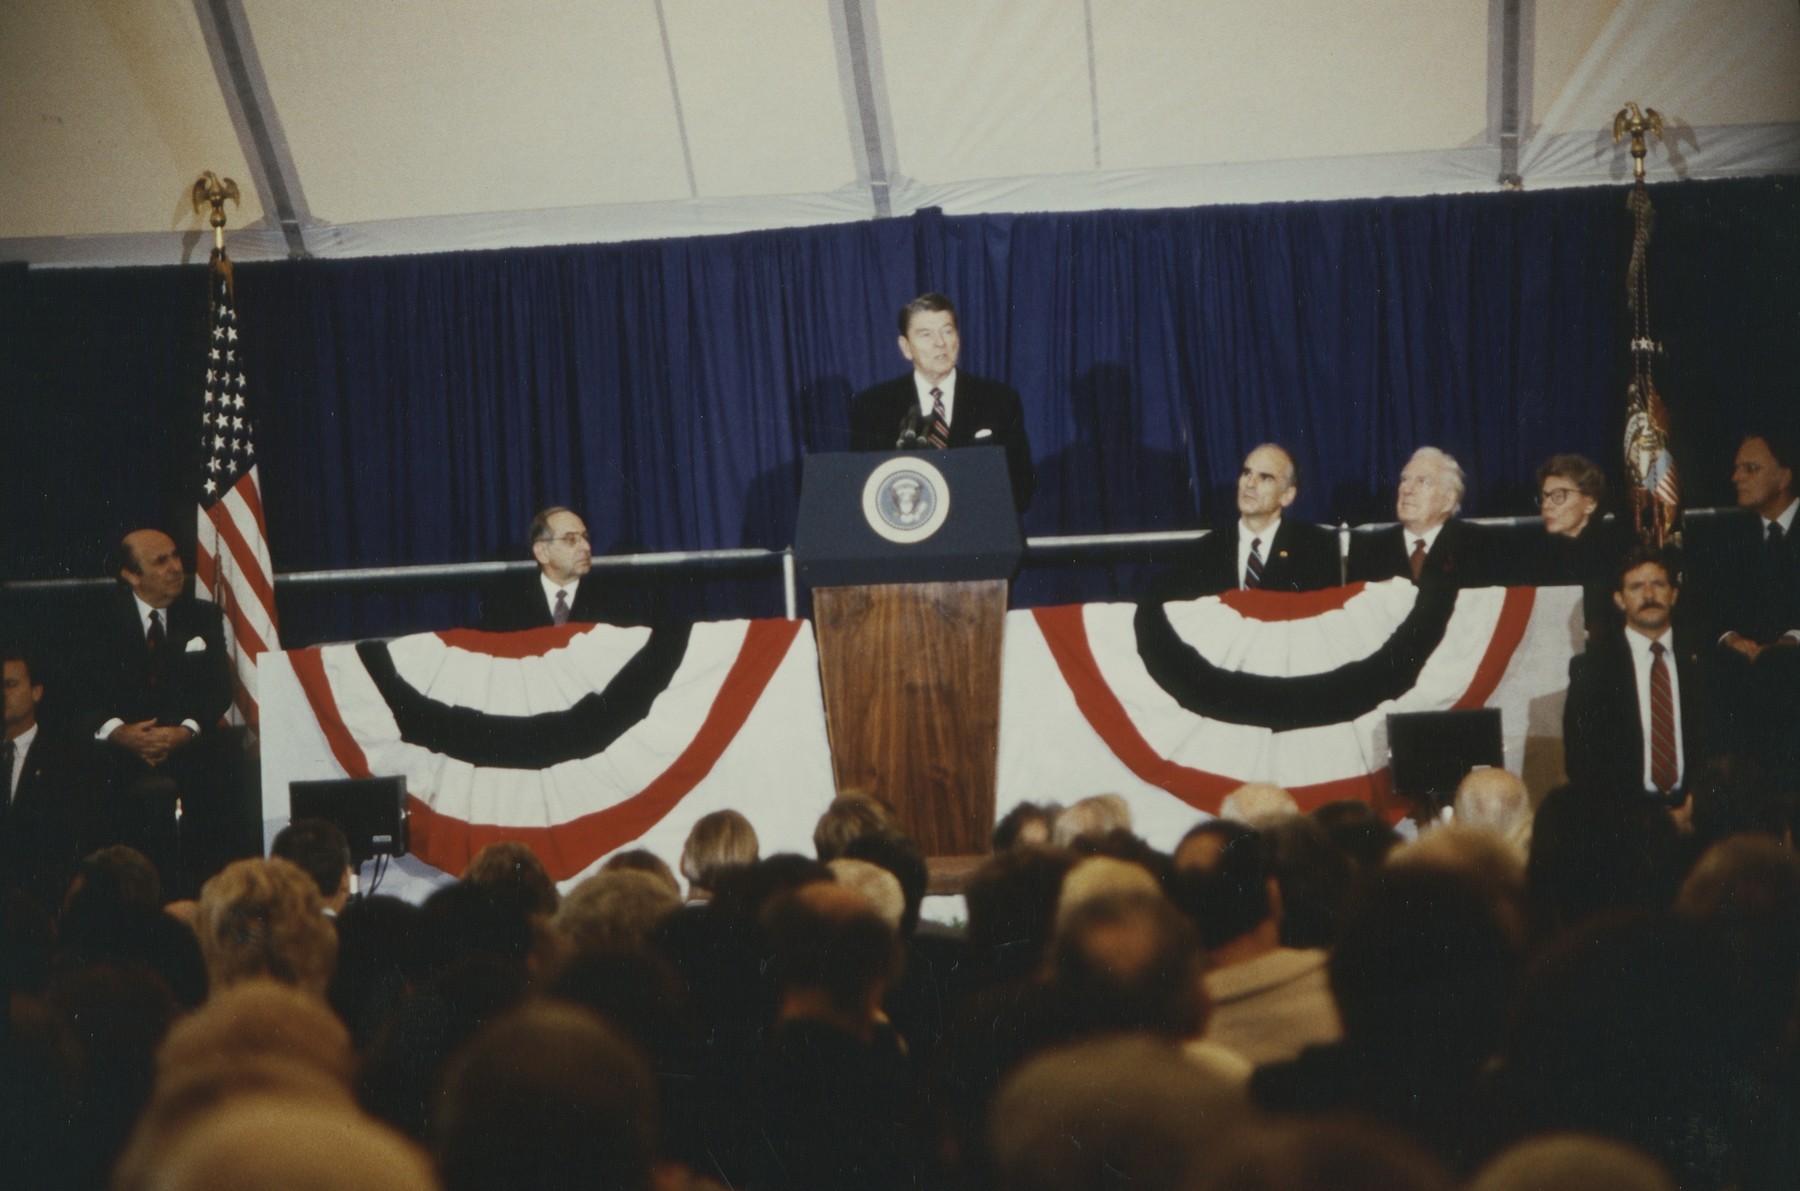 Ronald Reagan speaking at the laying of the cornerstone ceremony of the U.S. Holocaust Memorial Museum.